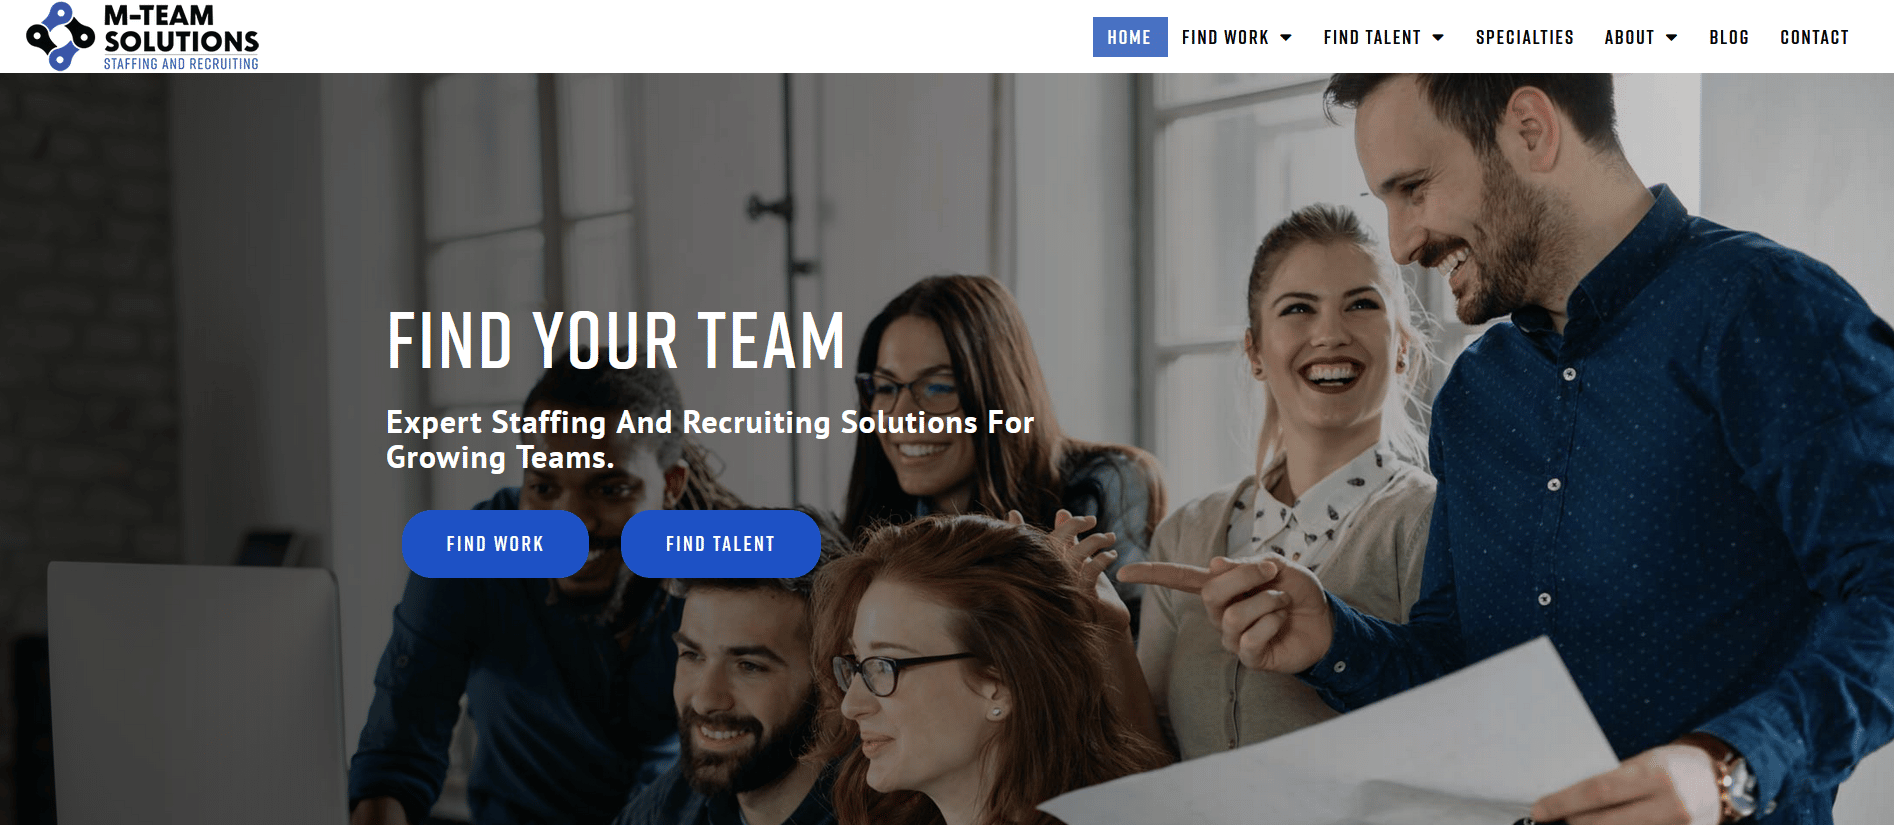 M-Team Solutions Gears Up For A New Website